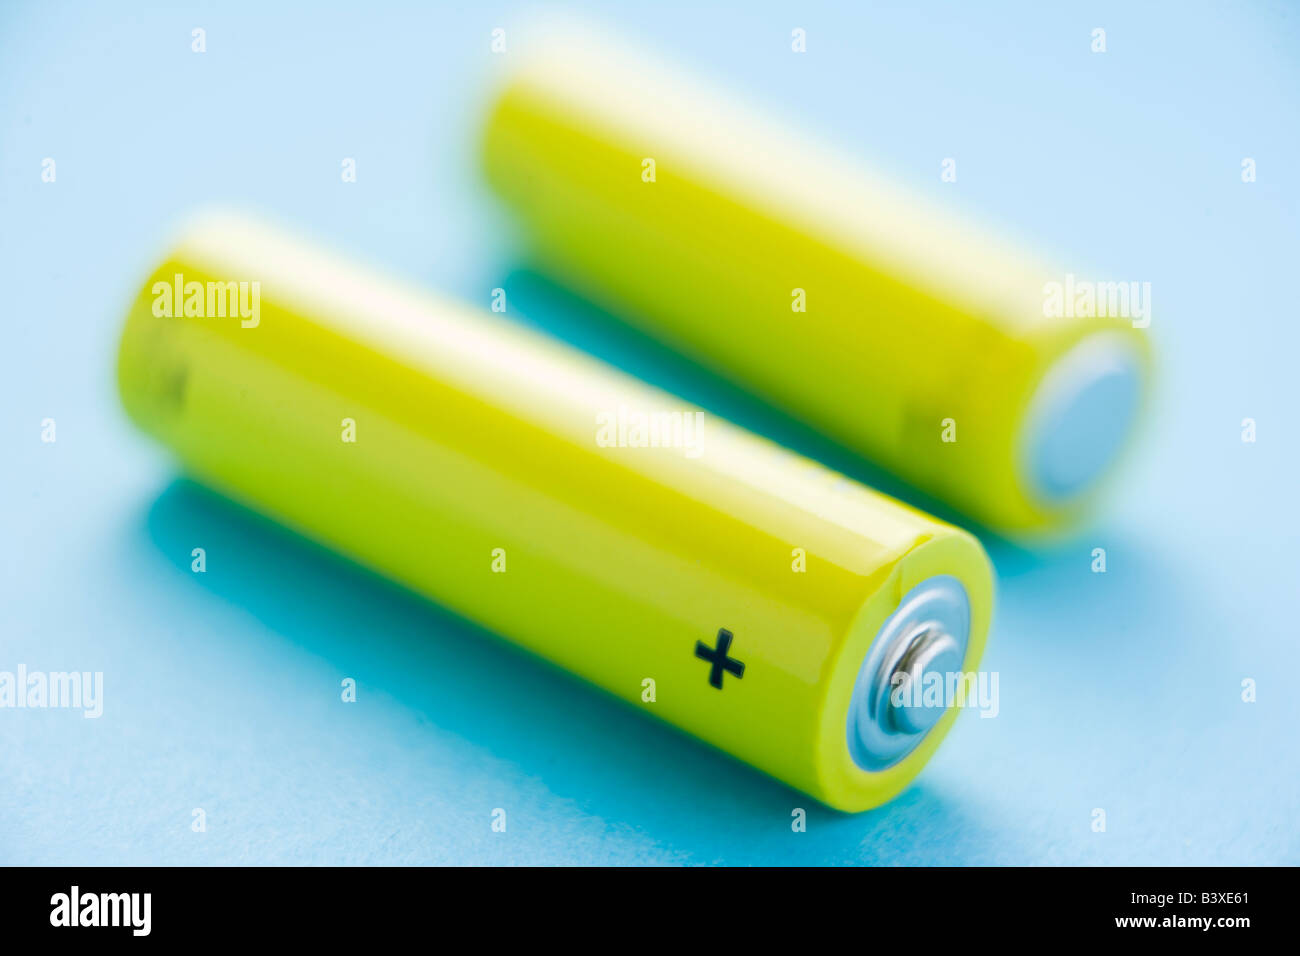 Two Yellow Batteries Against A Blue Background Stock Photo